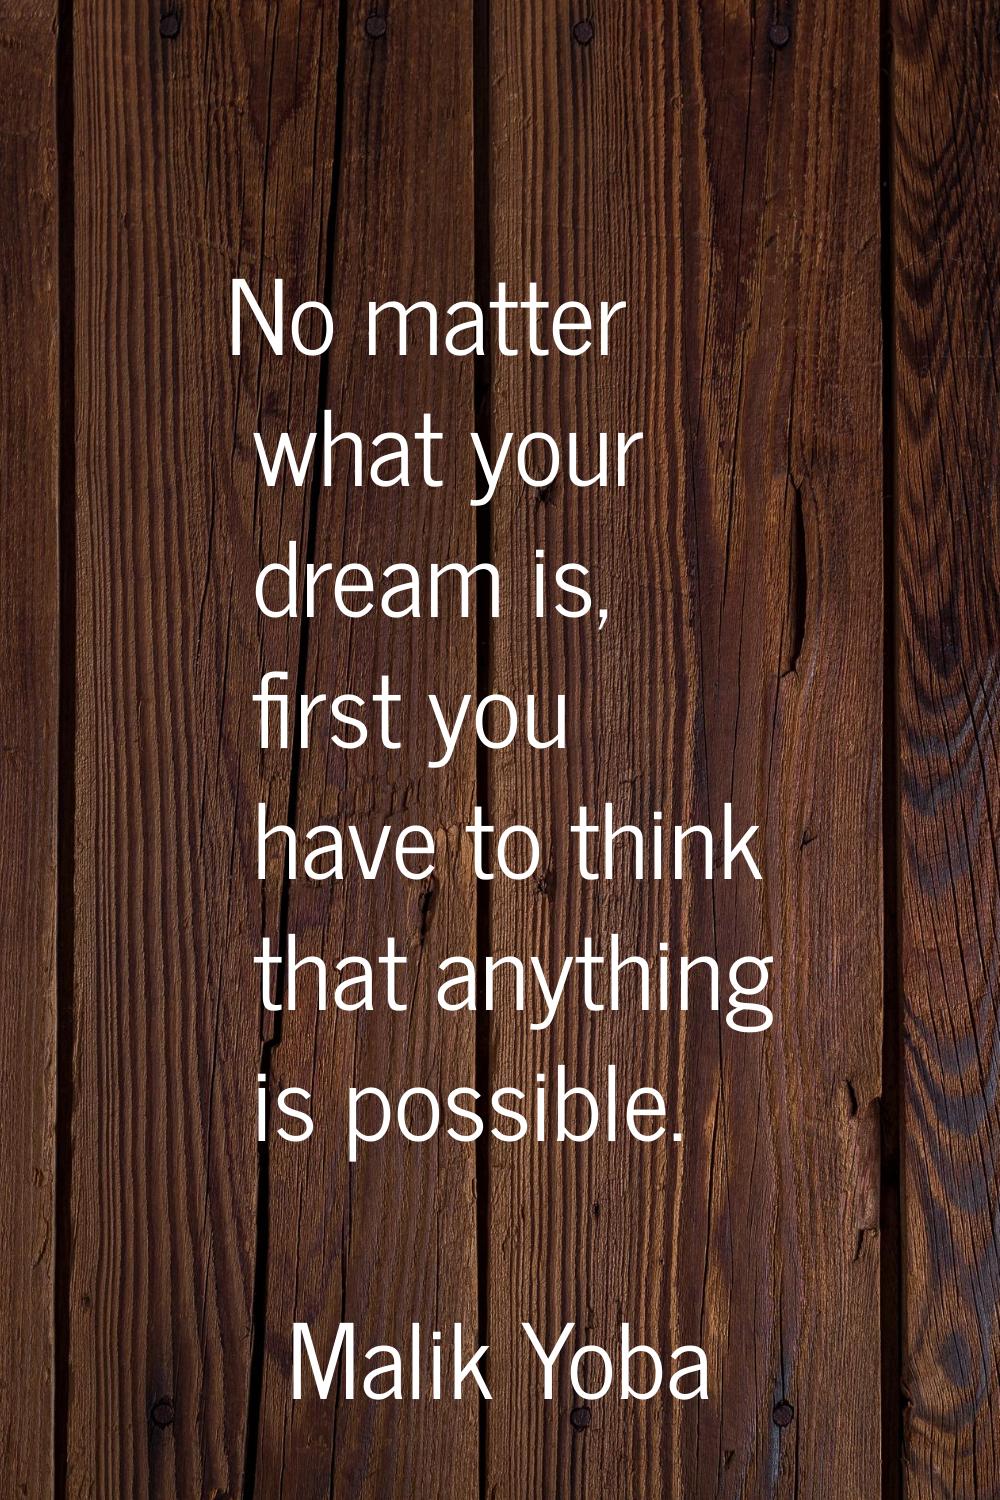 No matter what your dream is, first you have to think that anything is possible.